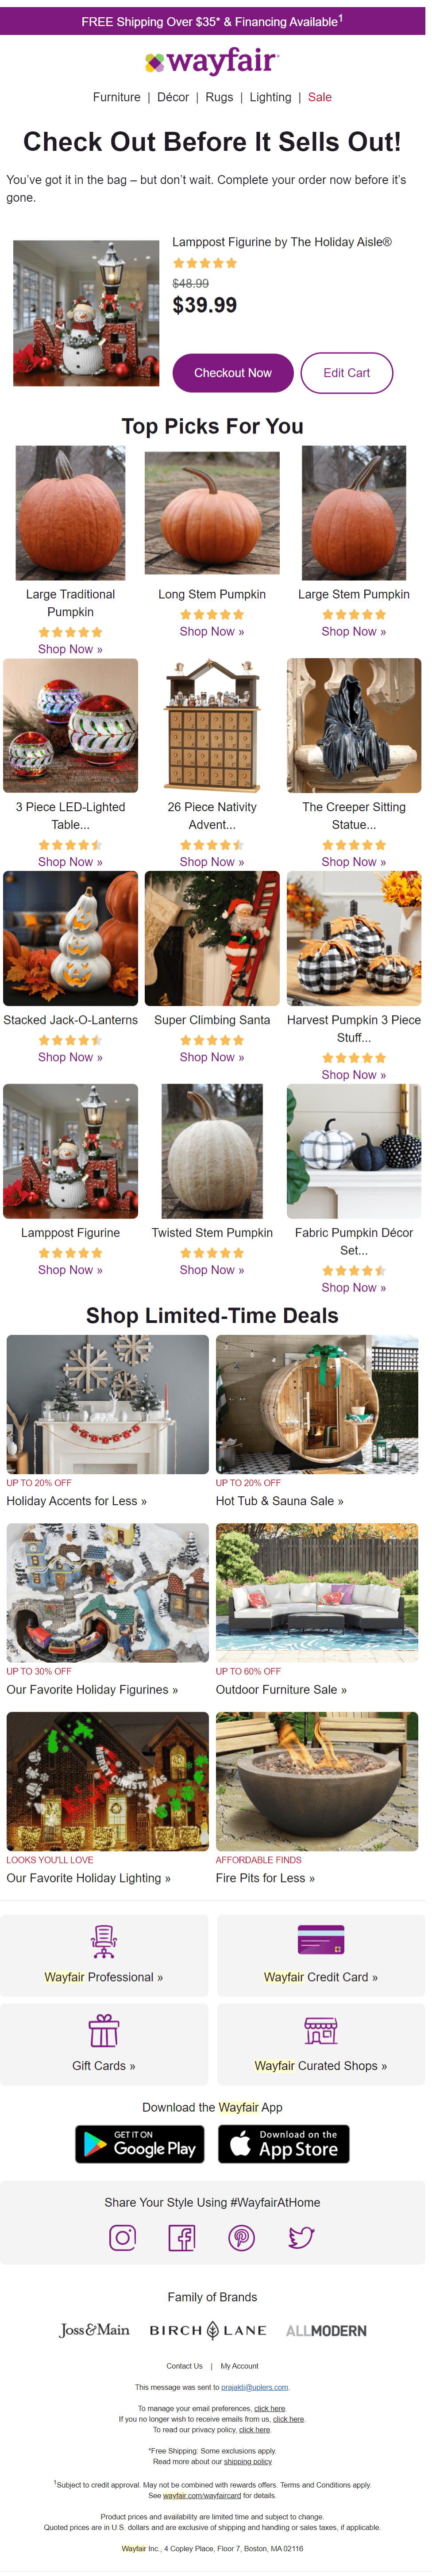 wayfair email within one hour of abandonment